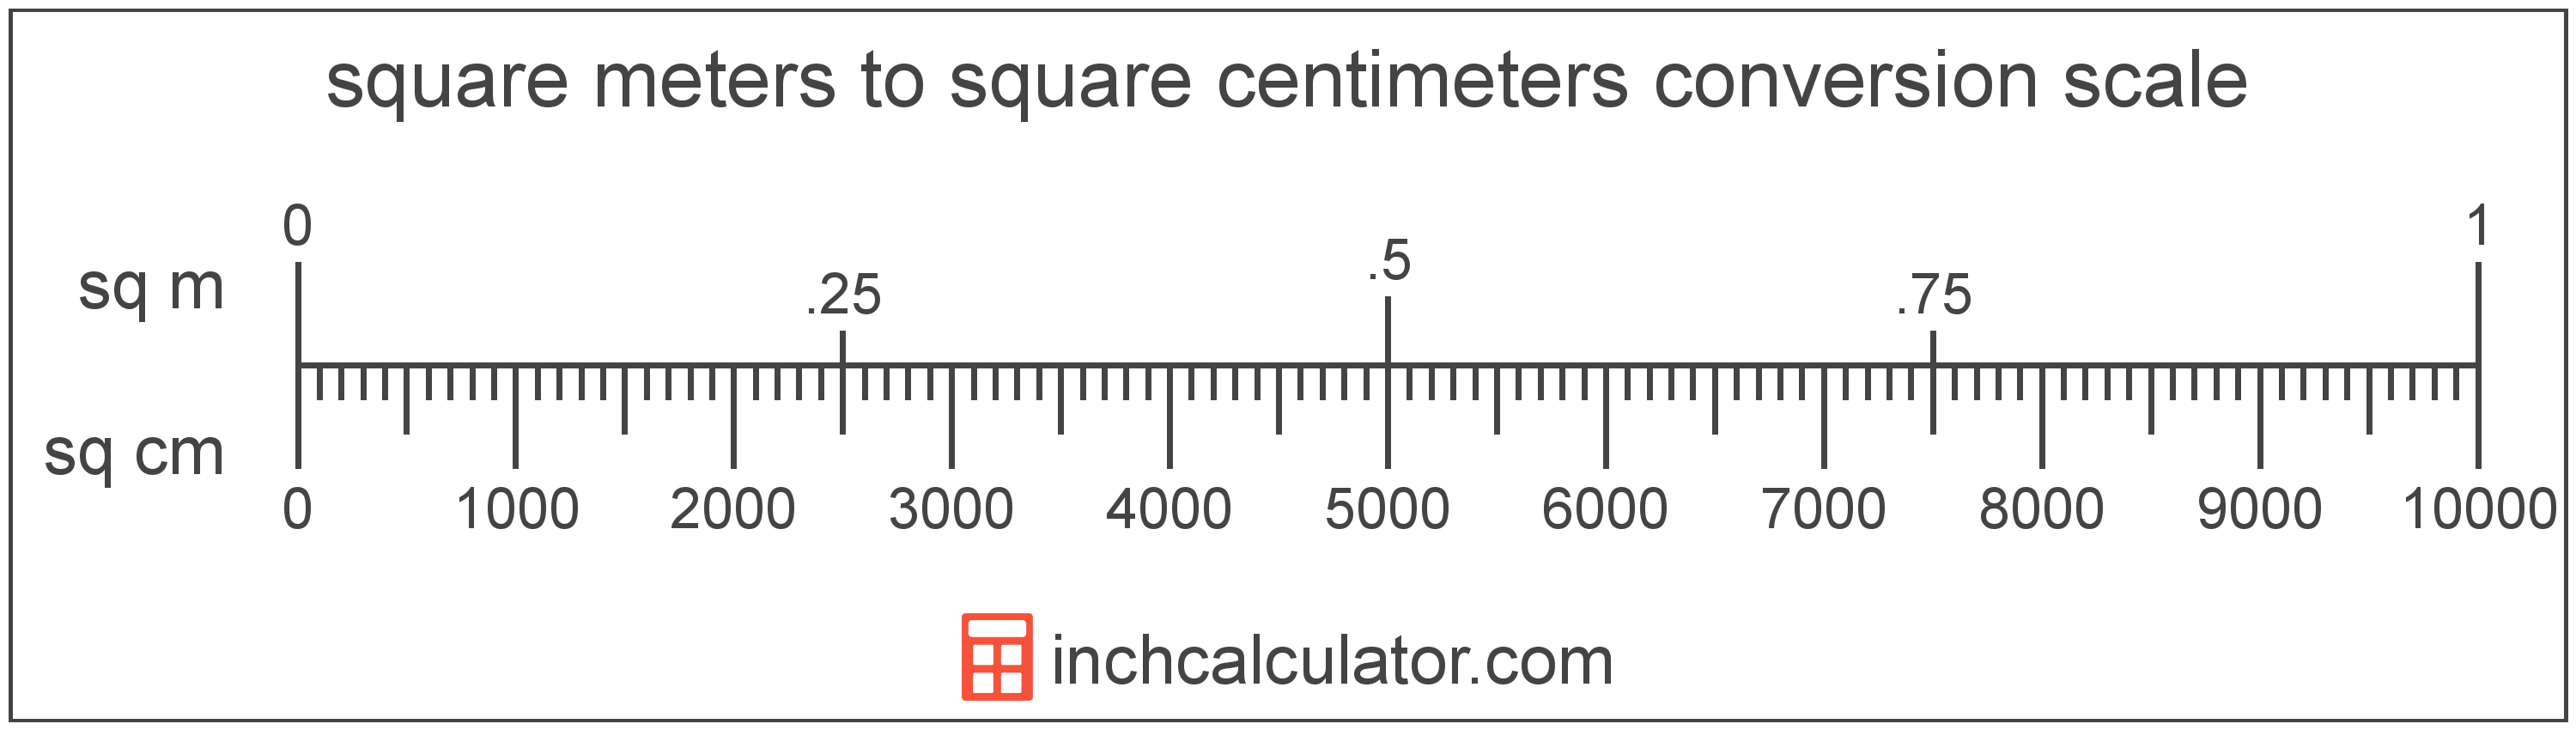 conversion scale showing square centimeters and equivalent square meters area values